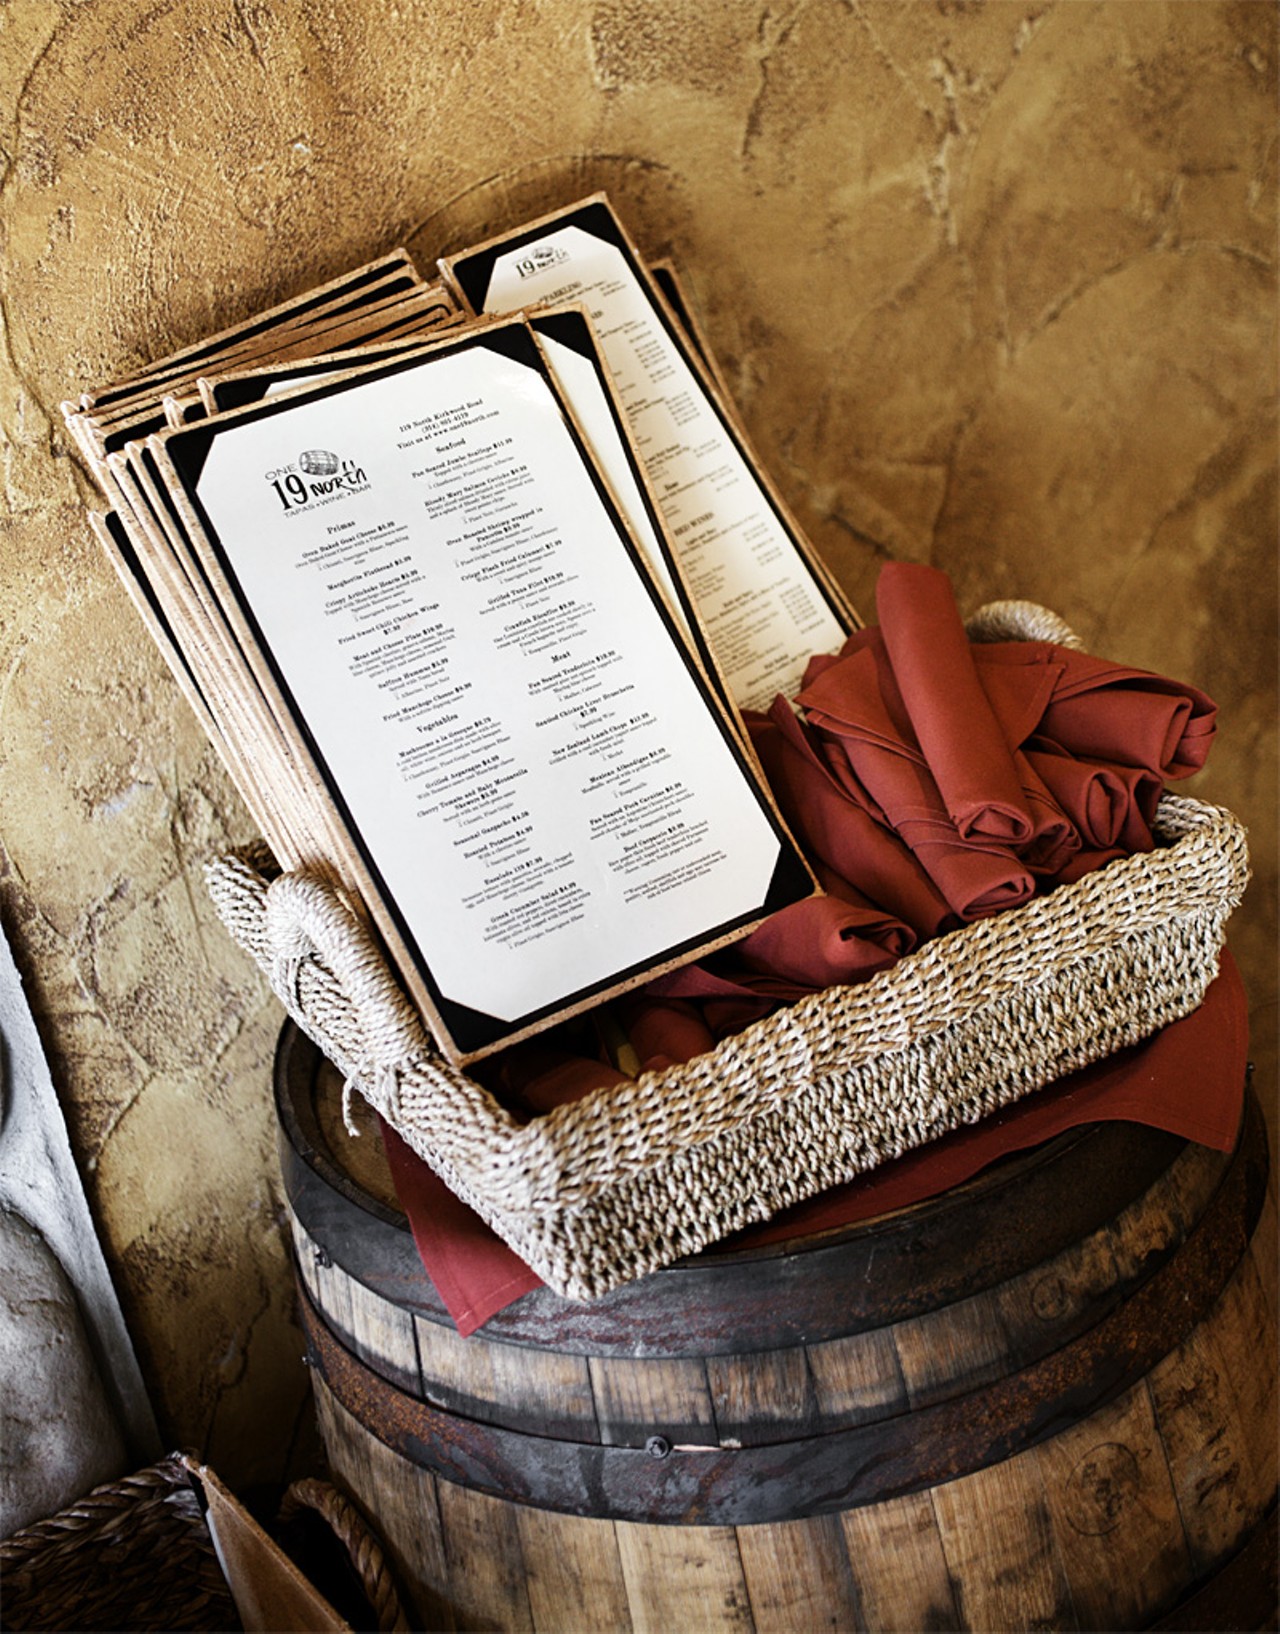 At One19 North, in keeping with the wine barrel decor, even the menus are made with a cork backing.